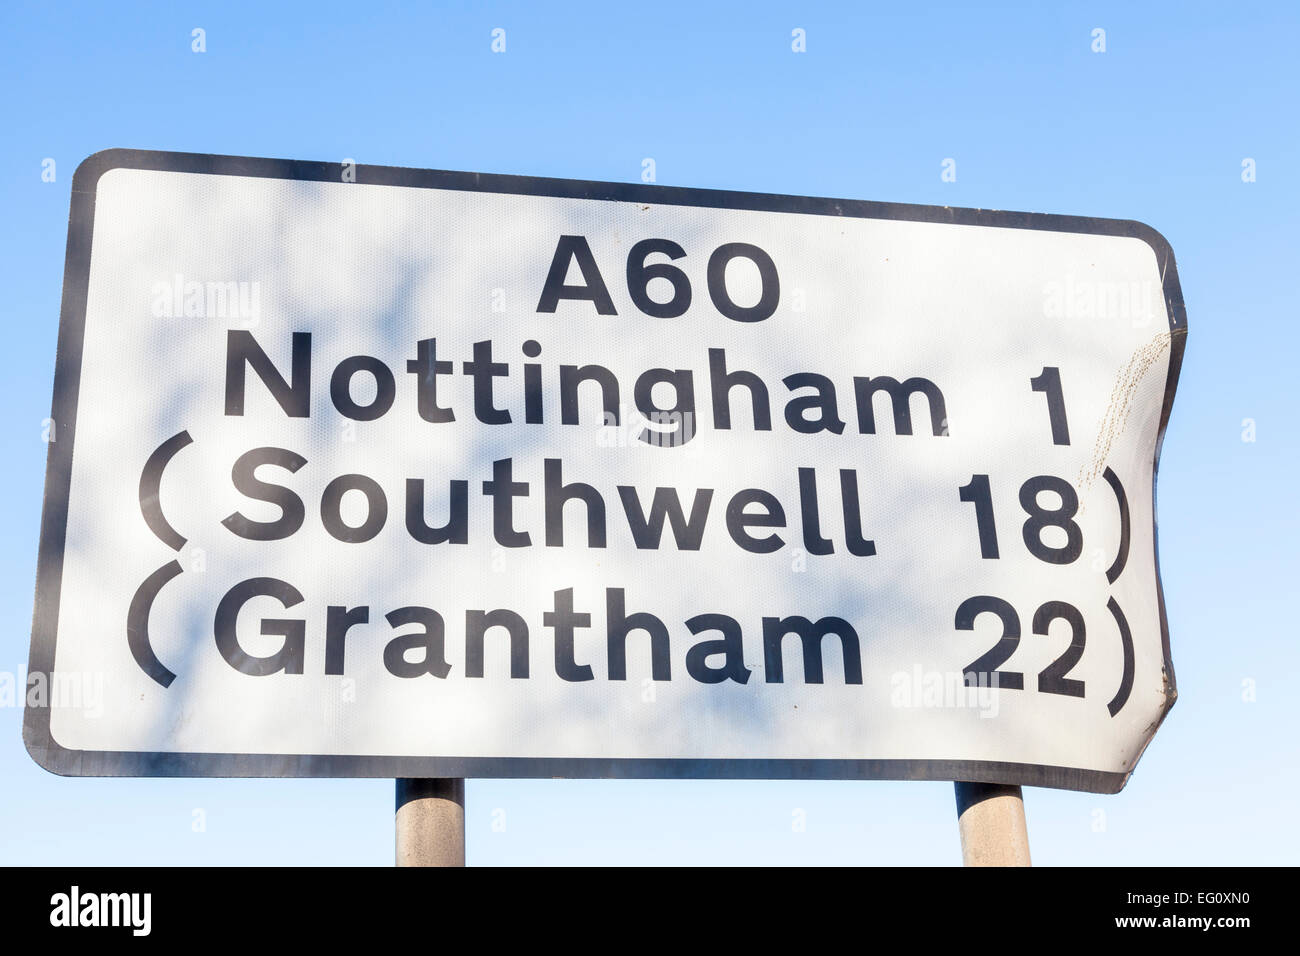 Damaged road sign. Damage caused by a vehicle colliding with the sign, Nottinghamshire, England, UK Stock Photo